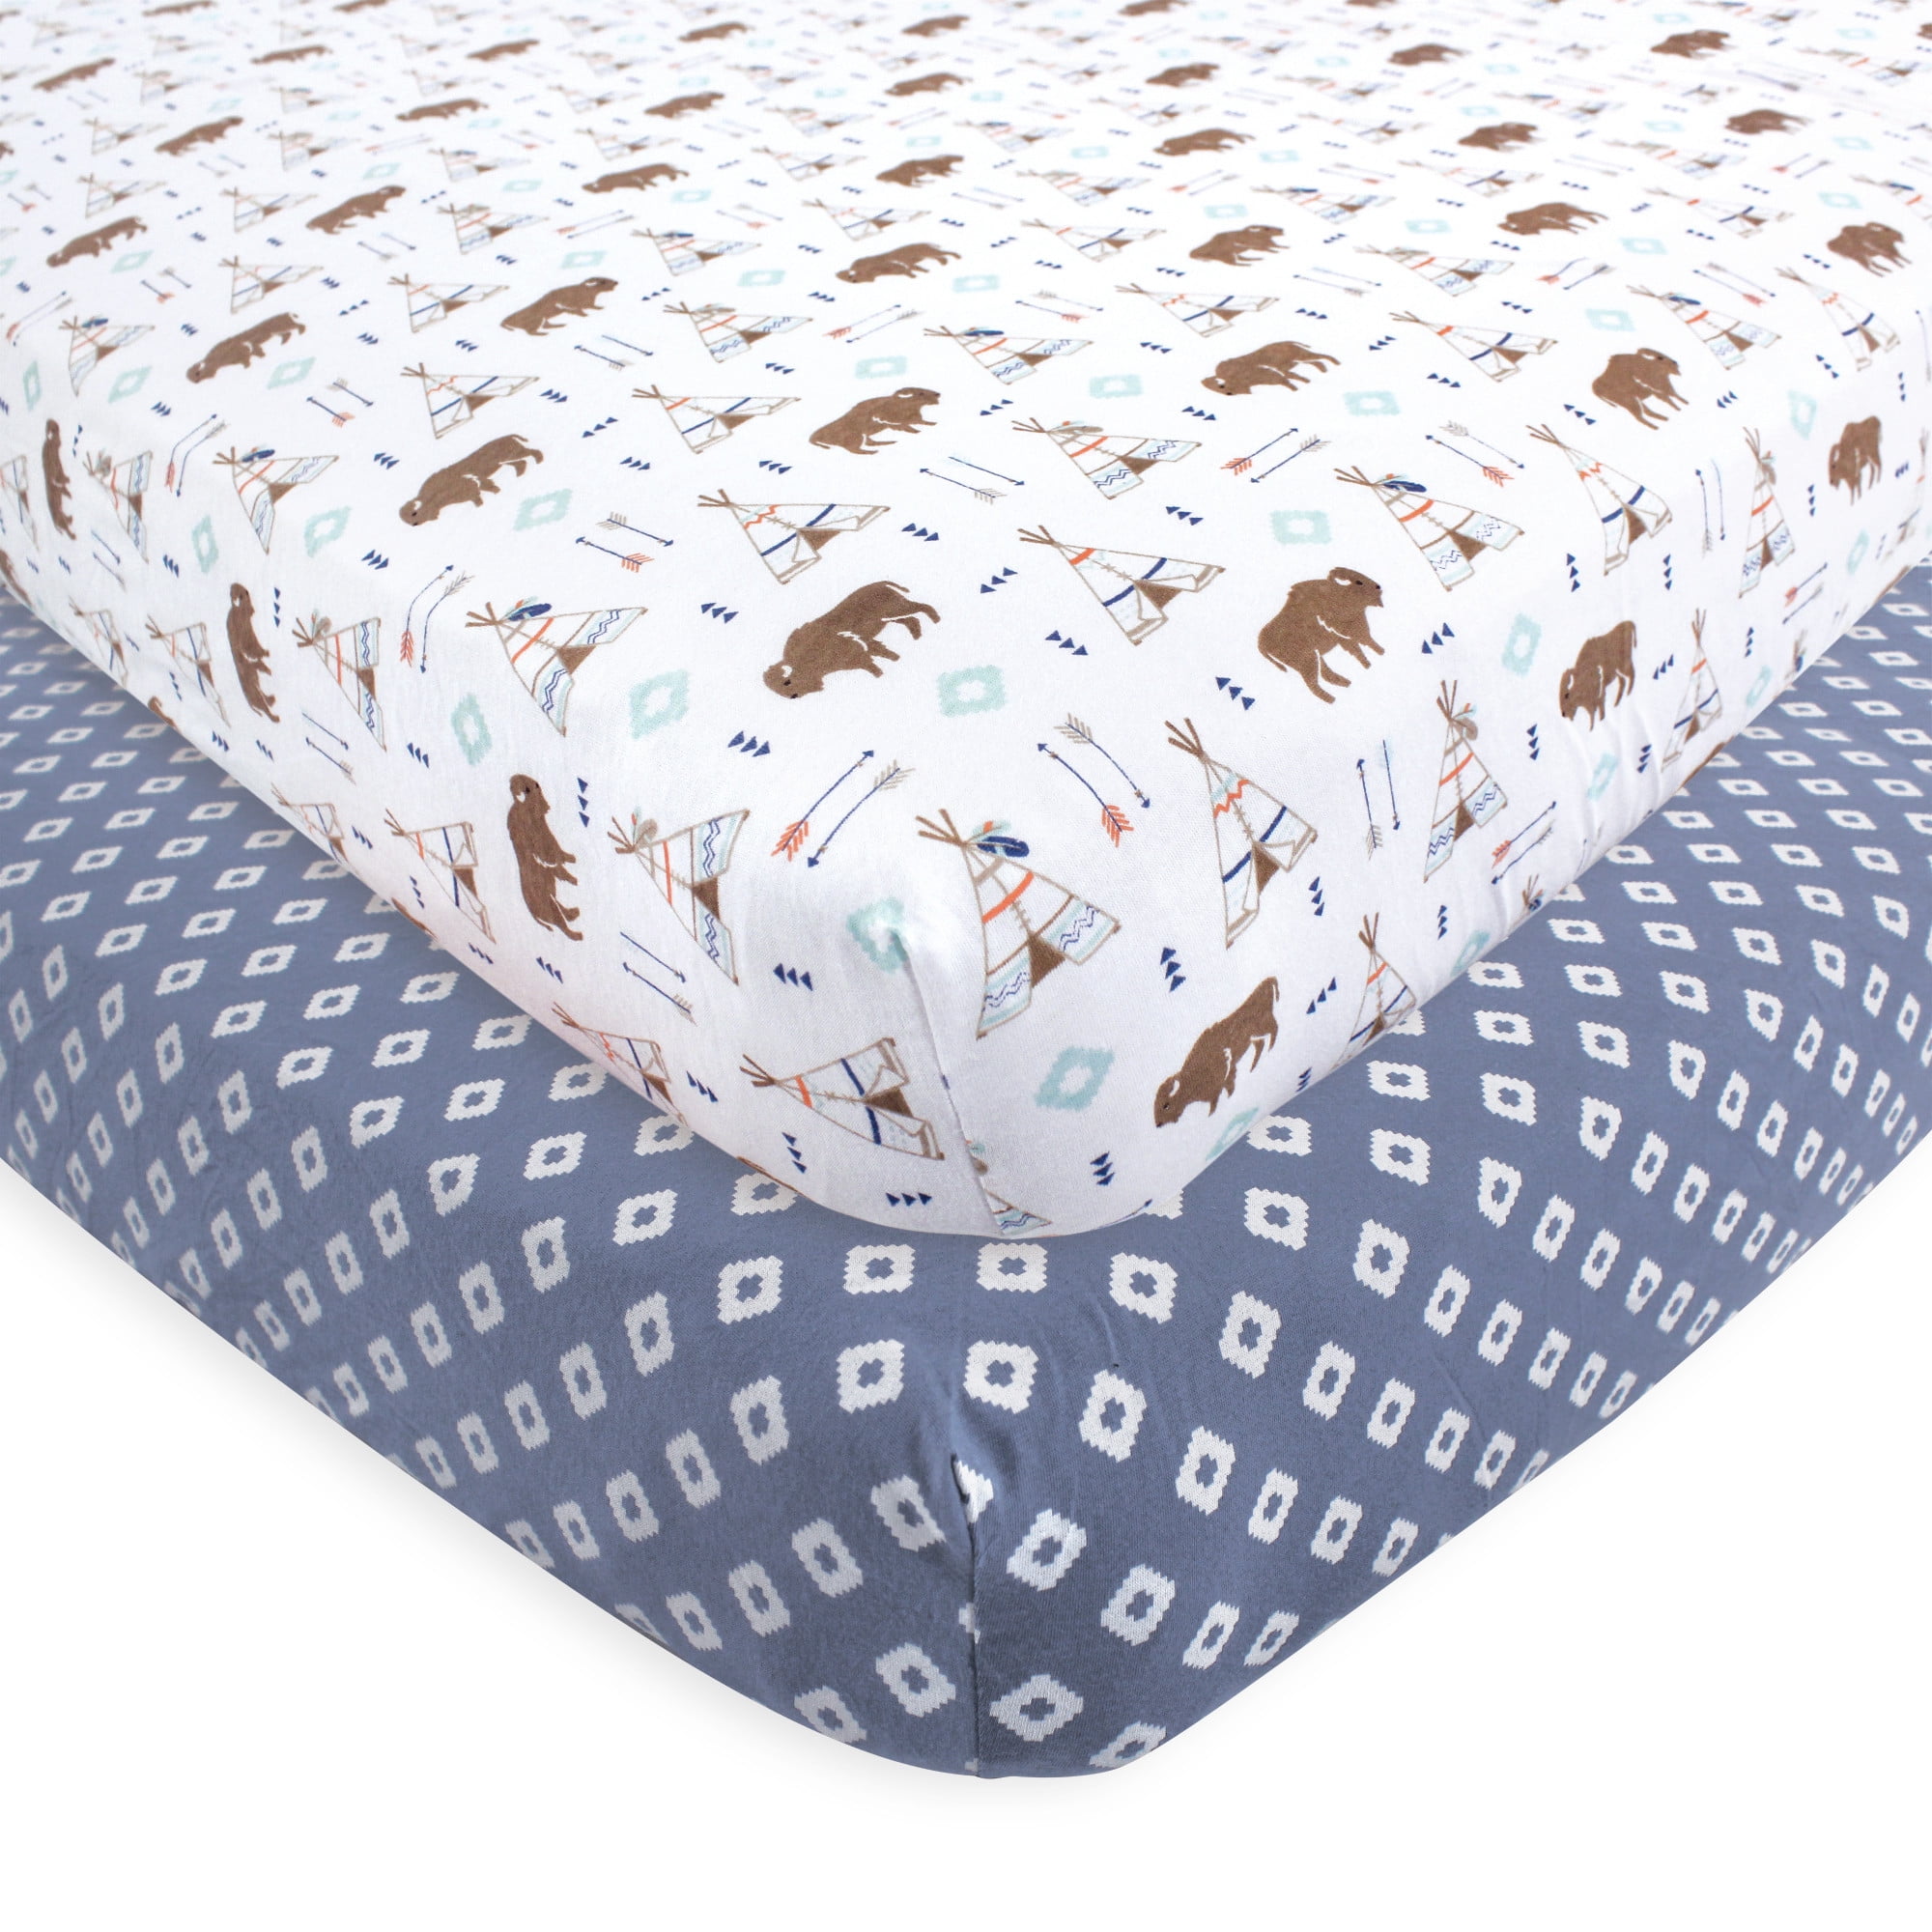 fitted crib sheets boy